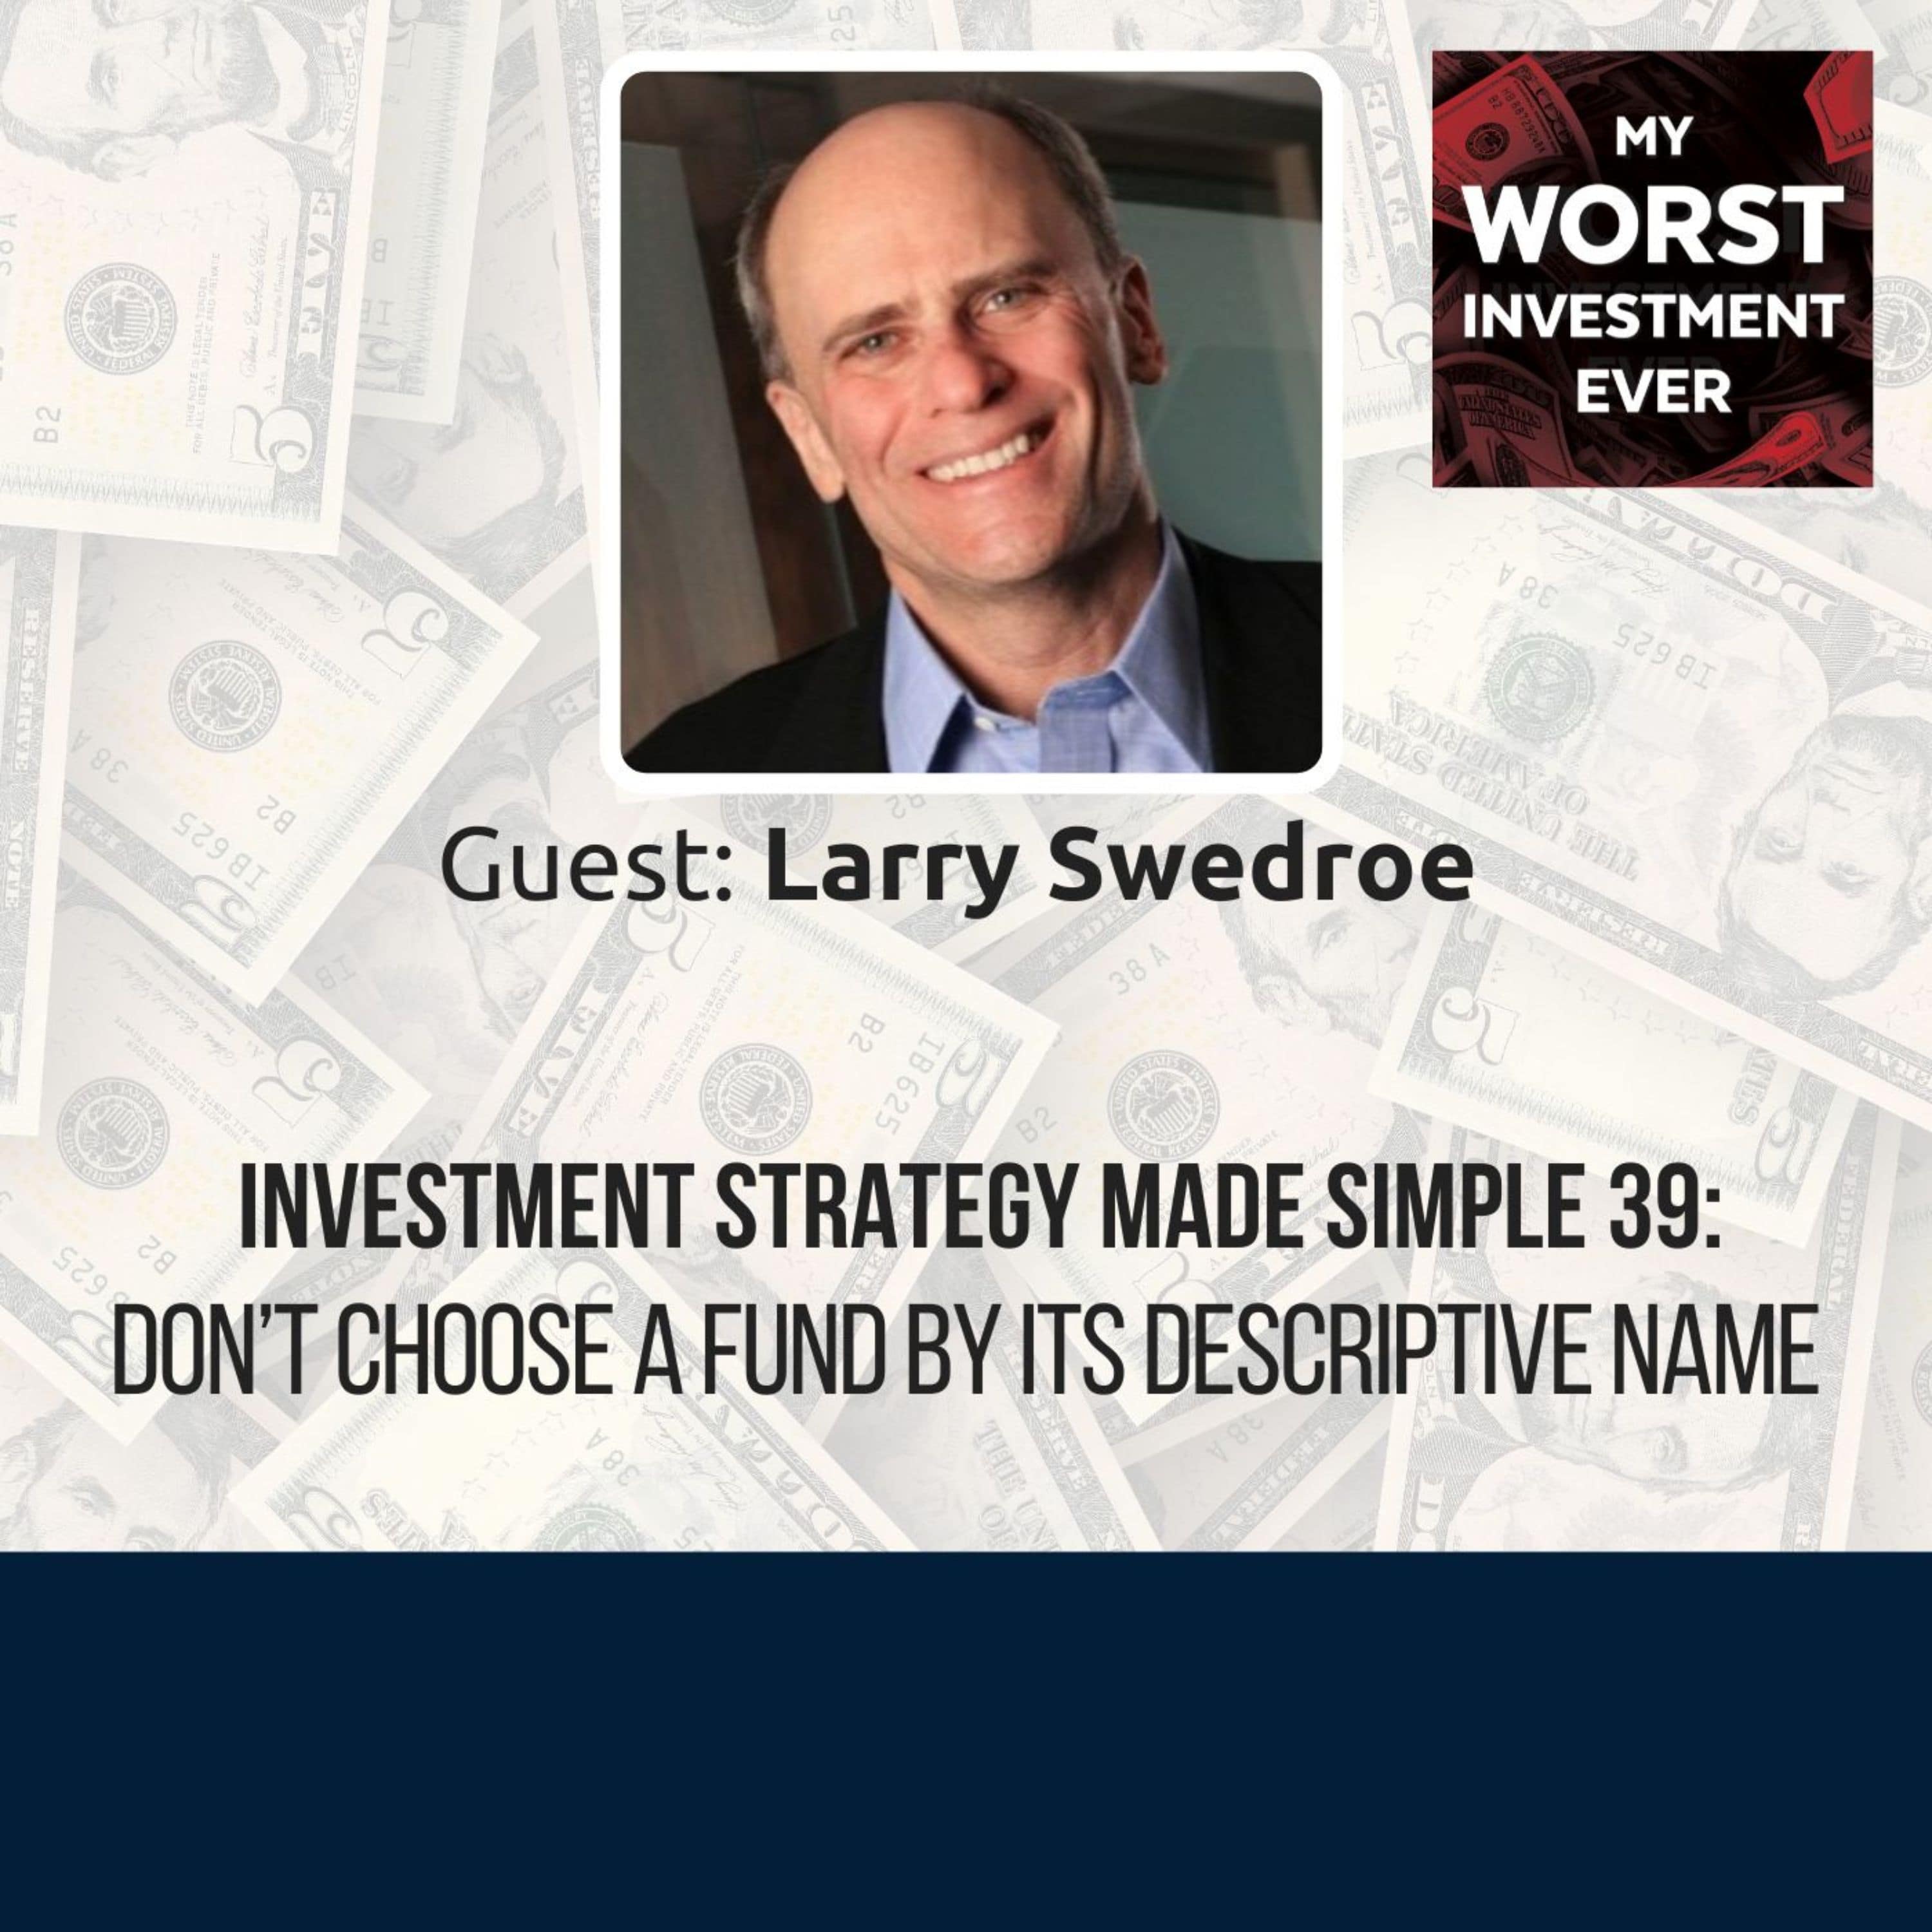 ISMS 39: Larry Swedroe – Don’t Choose a Fund by Its Descriptive Name